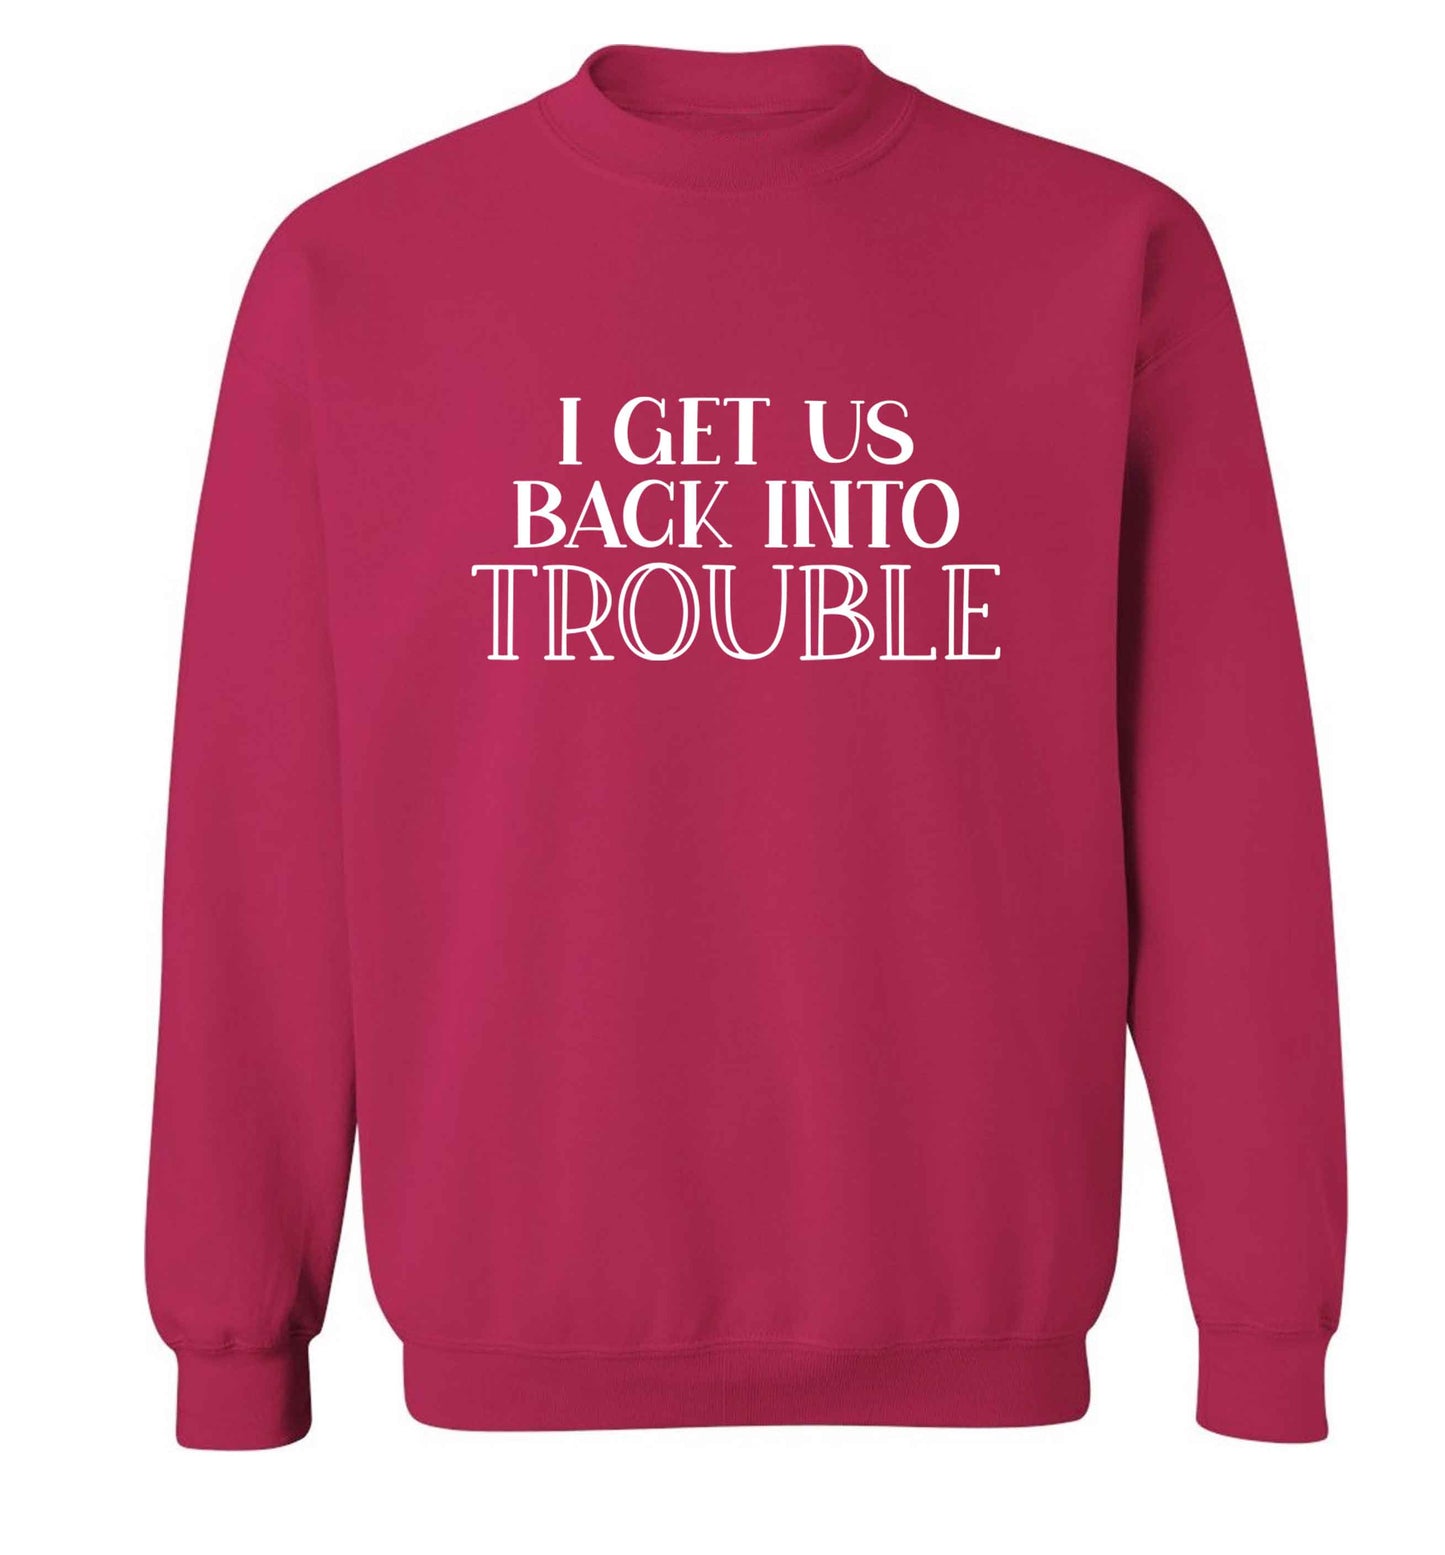 I get us back into trouble adult's unisex pink sweater 2XL